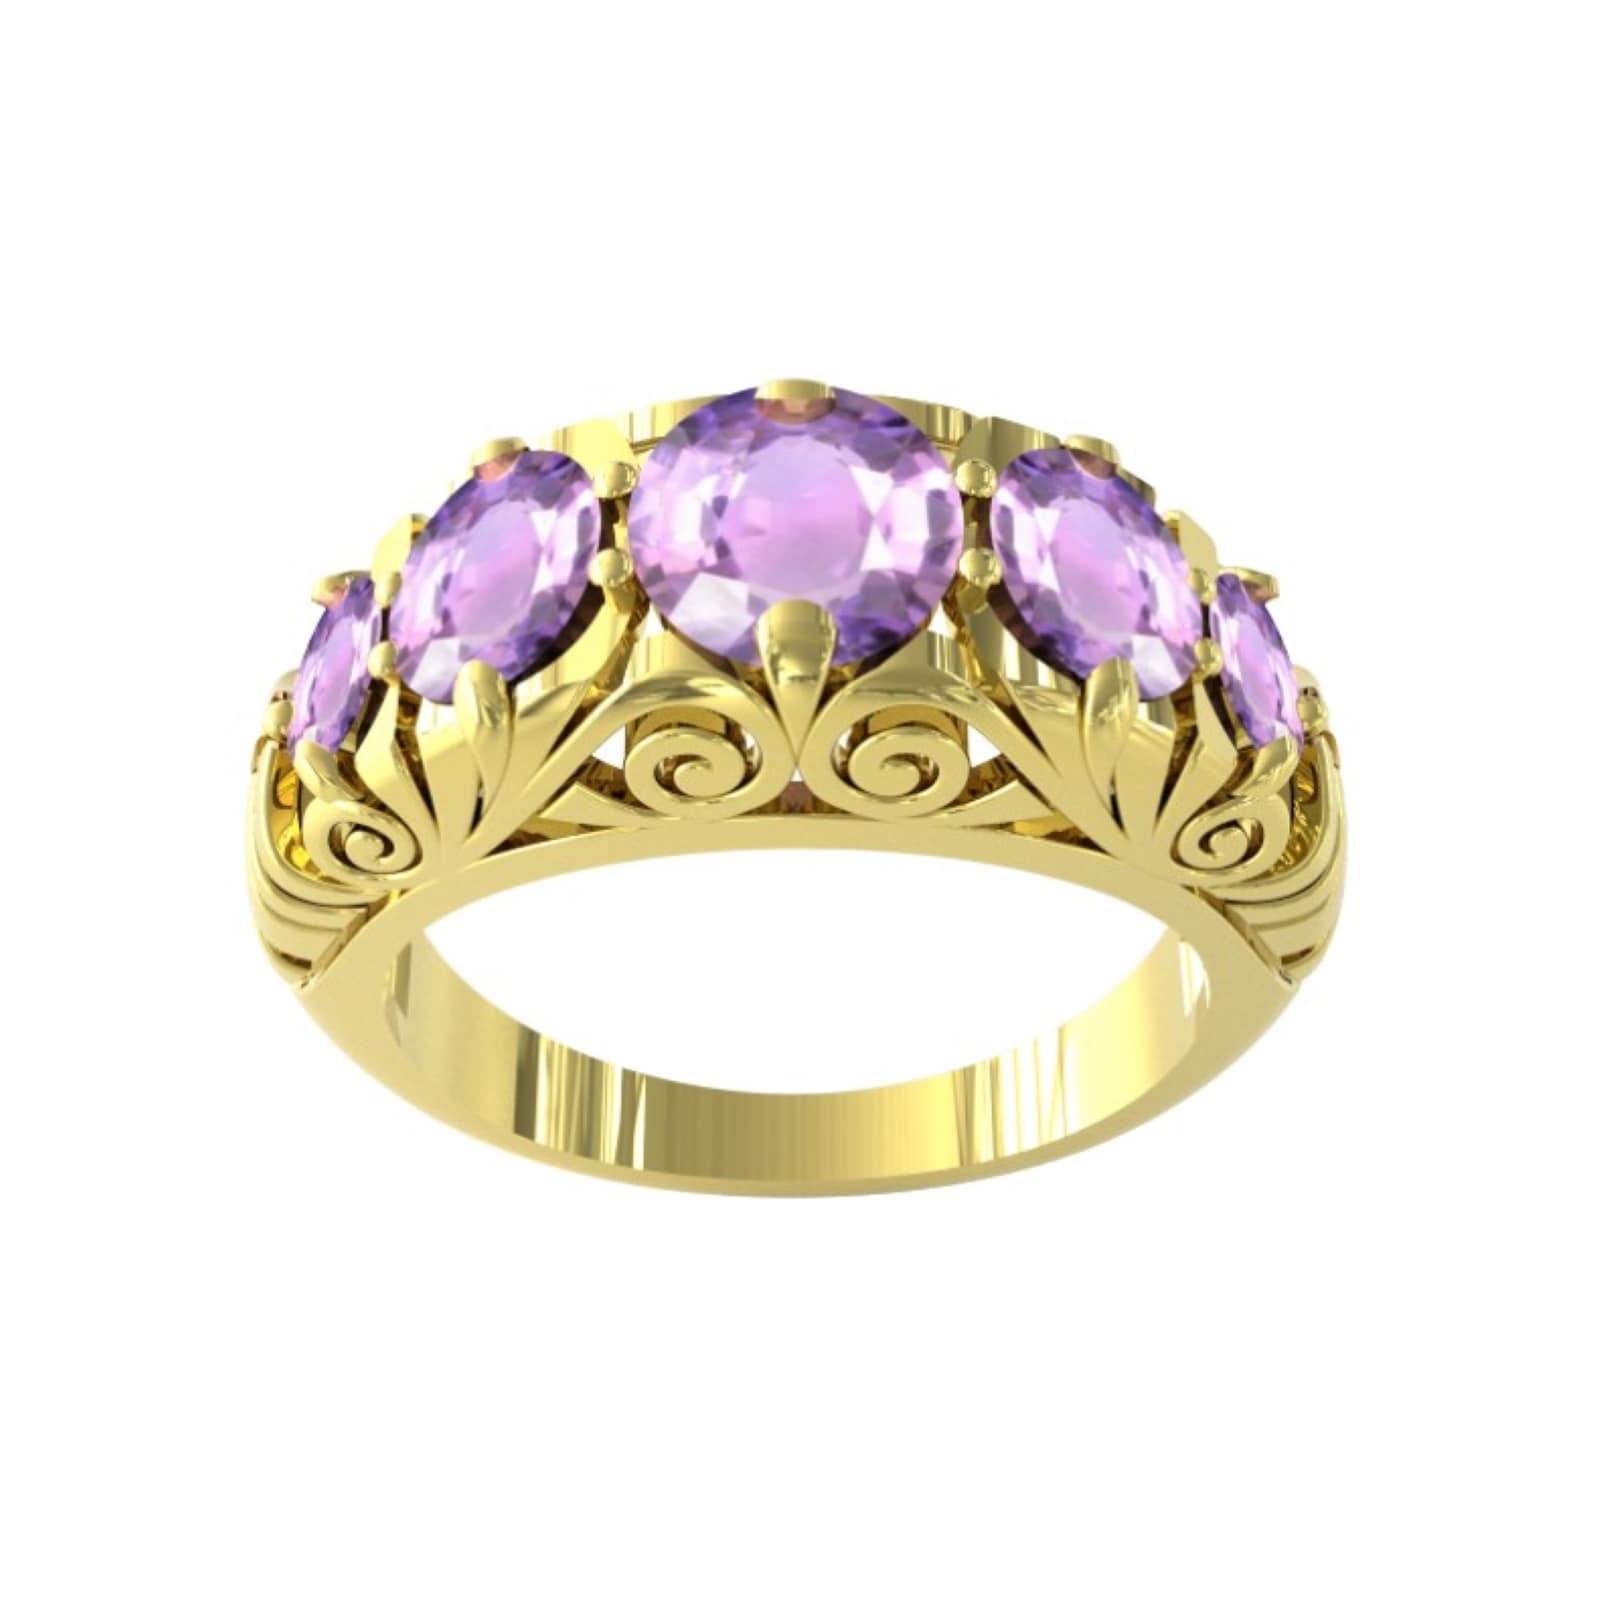 9ct Yellow Gold Victorian Style 5 Stone Amethyst Rings - Ring Size V